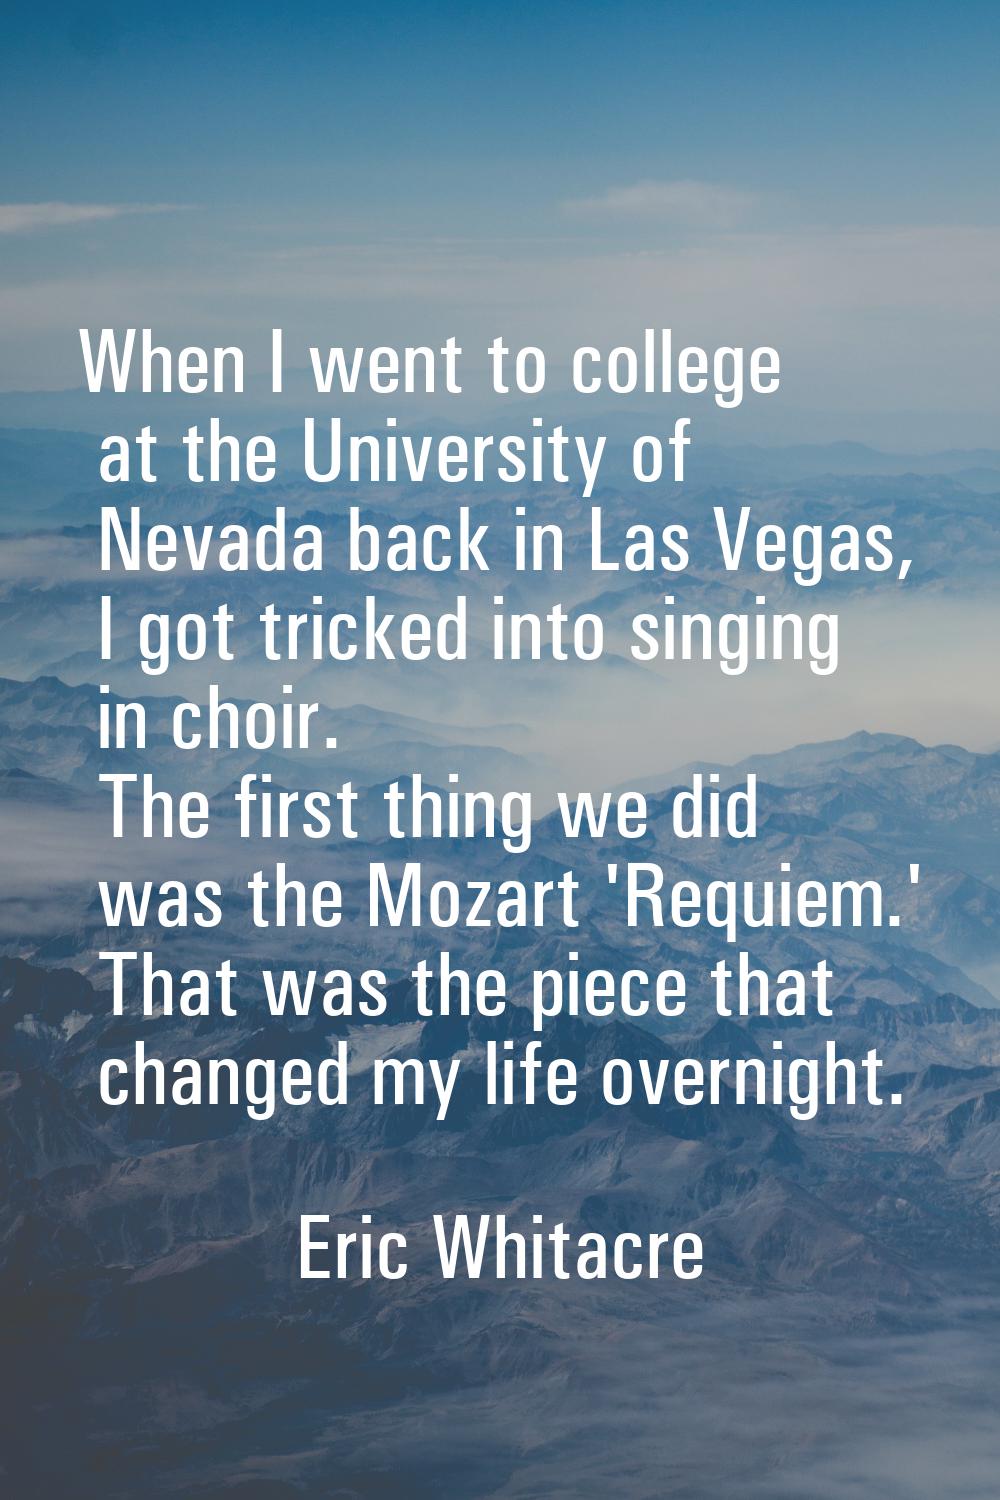 When I went to college at the University of Nevada back in Las Vegas, I got tricked into singing in